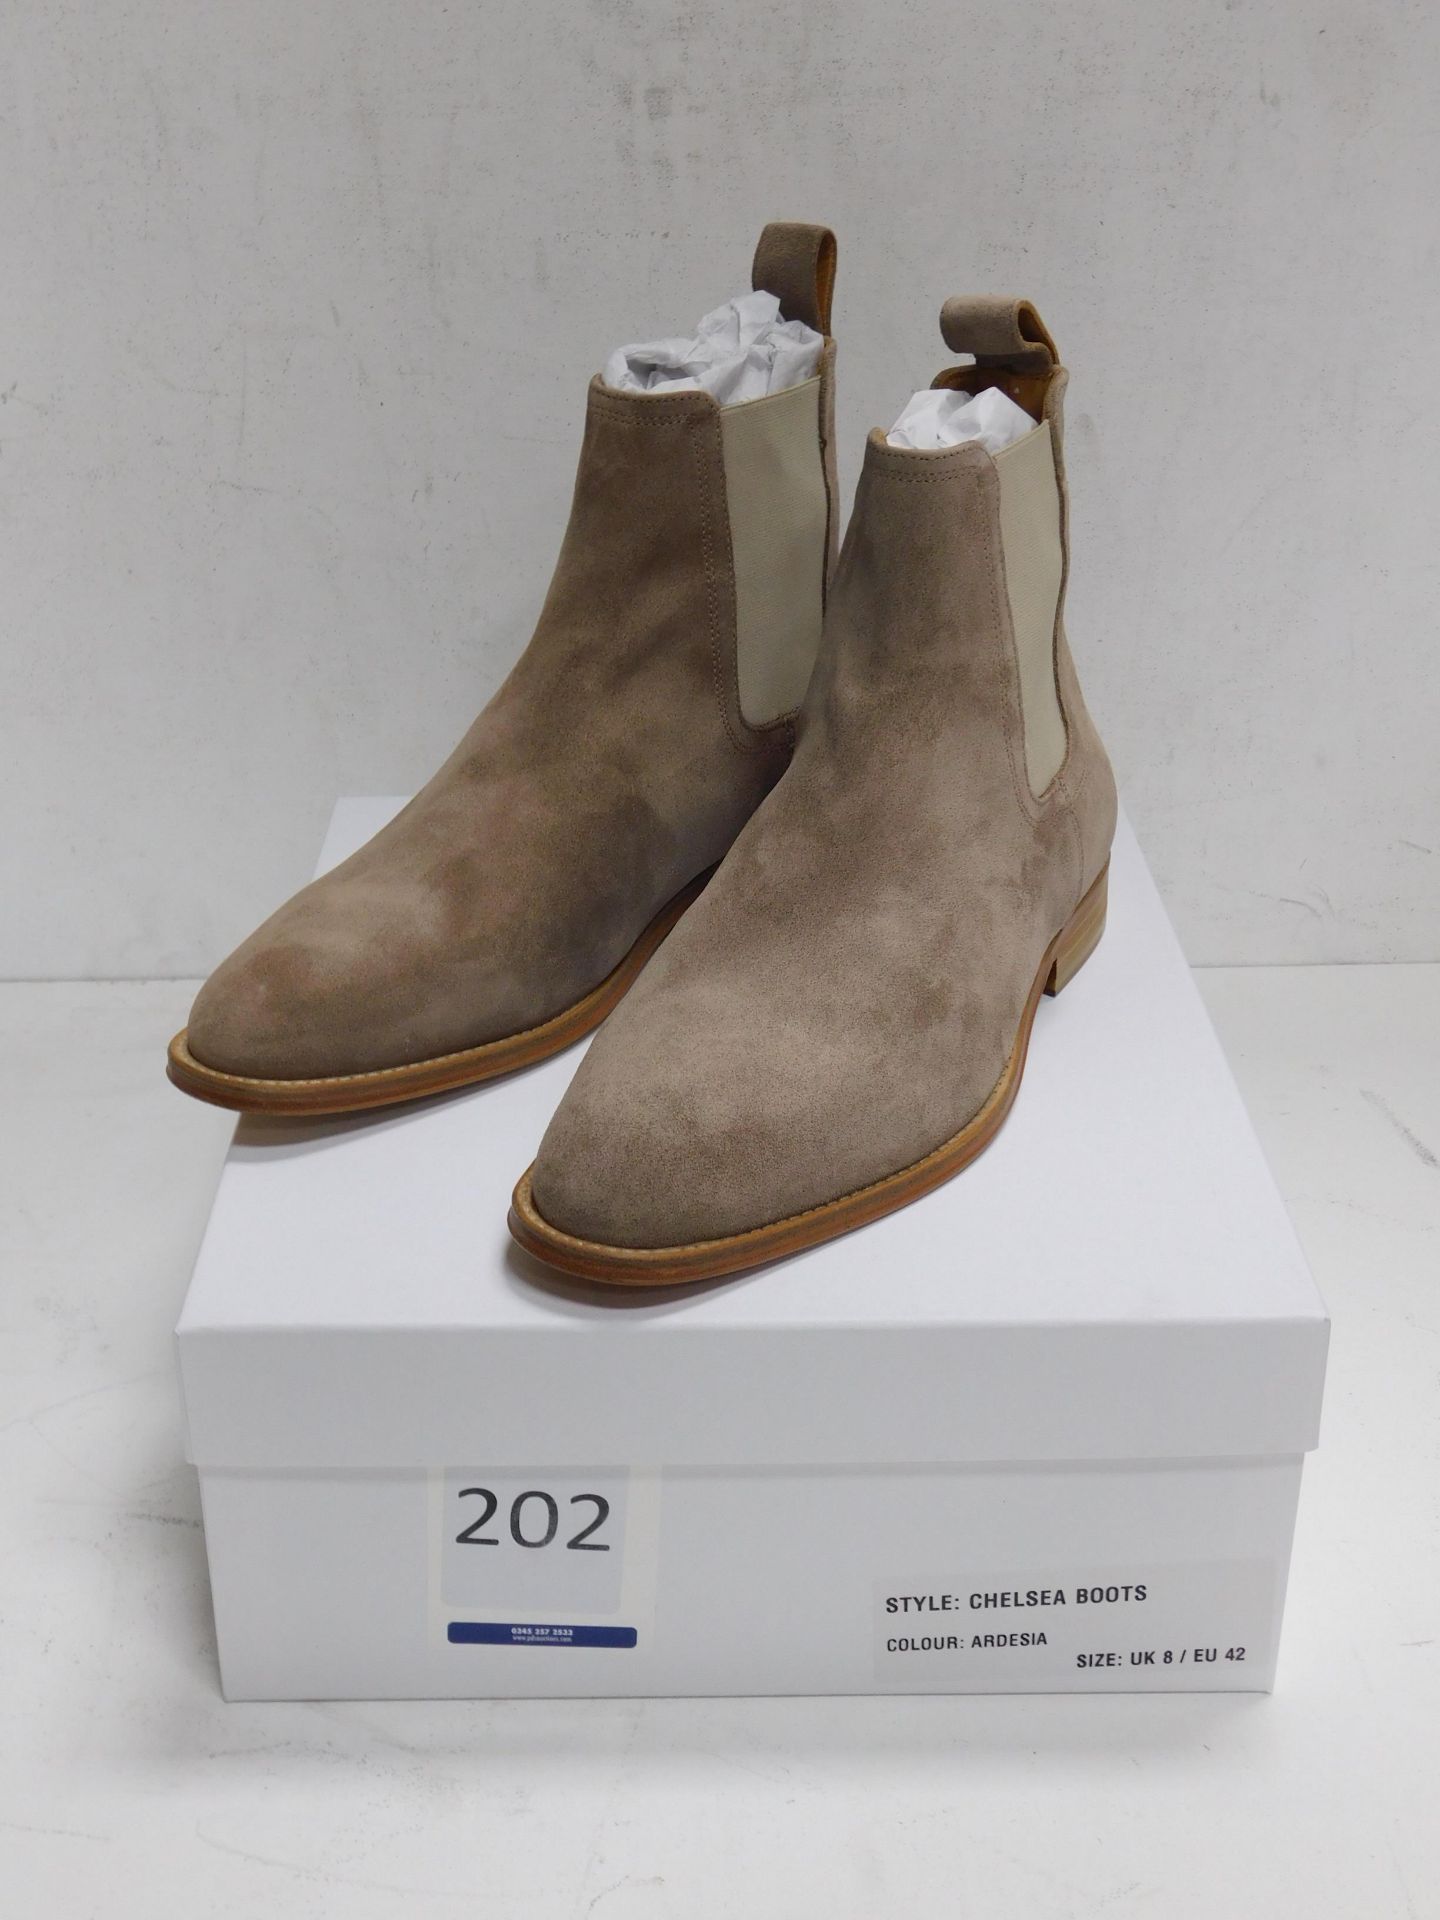 Pair of Ardent “Ardesia” Chelsea Boots, Size 8 (Located: Brentwood. Please Refer to General Notes)